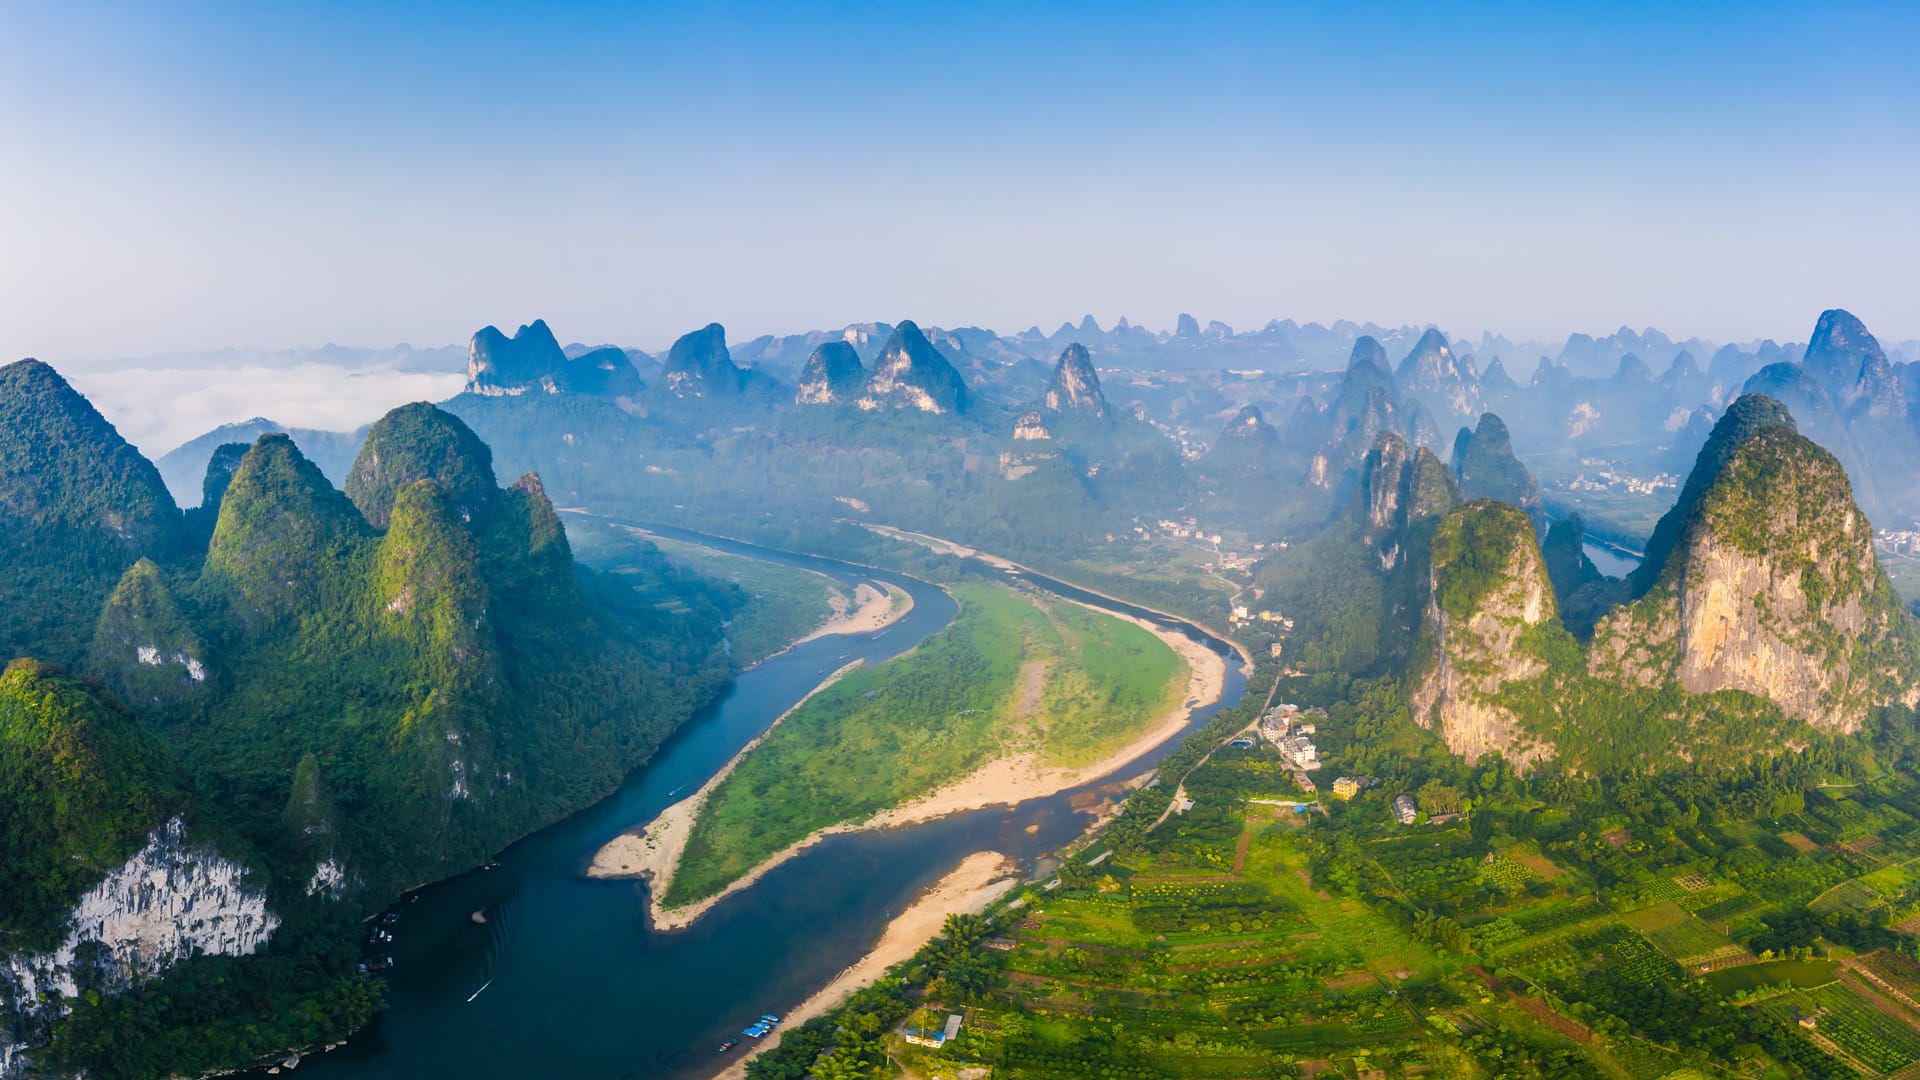 The Li River and Karst Mountains, Guilin